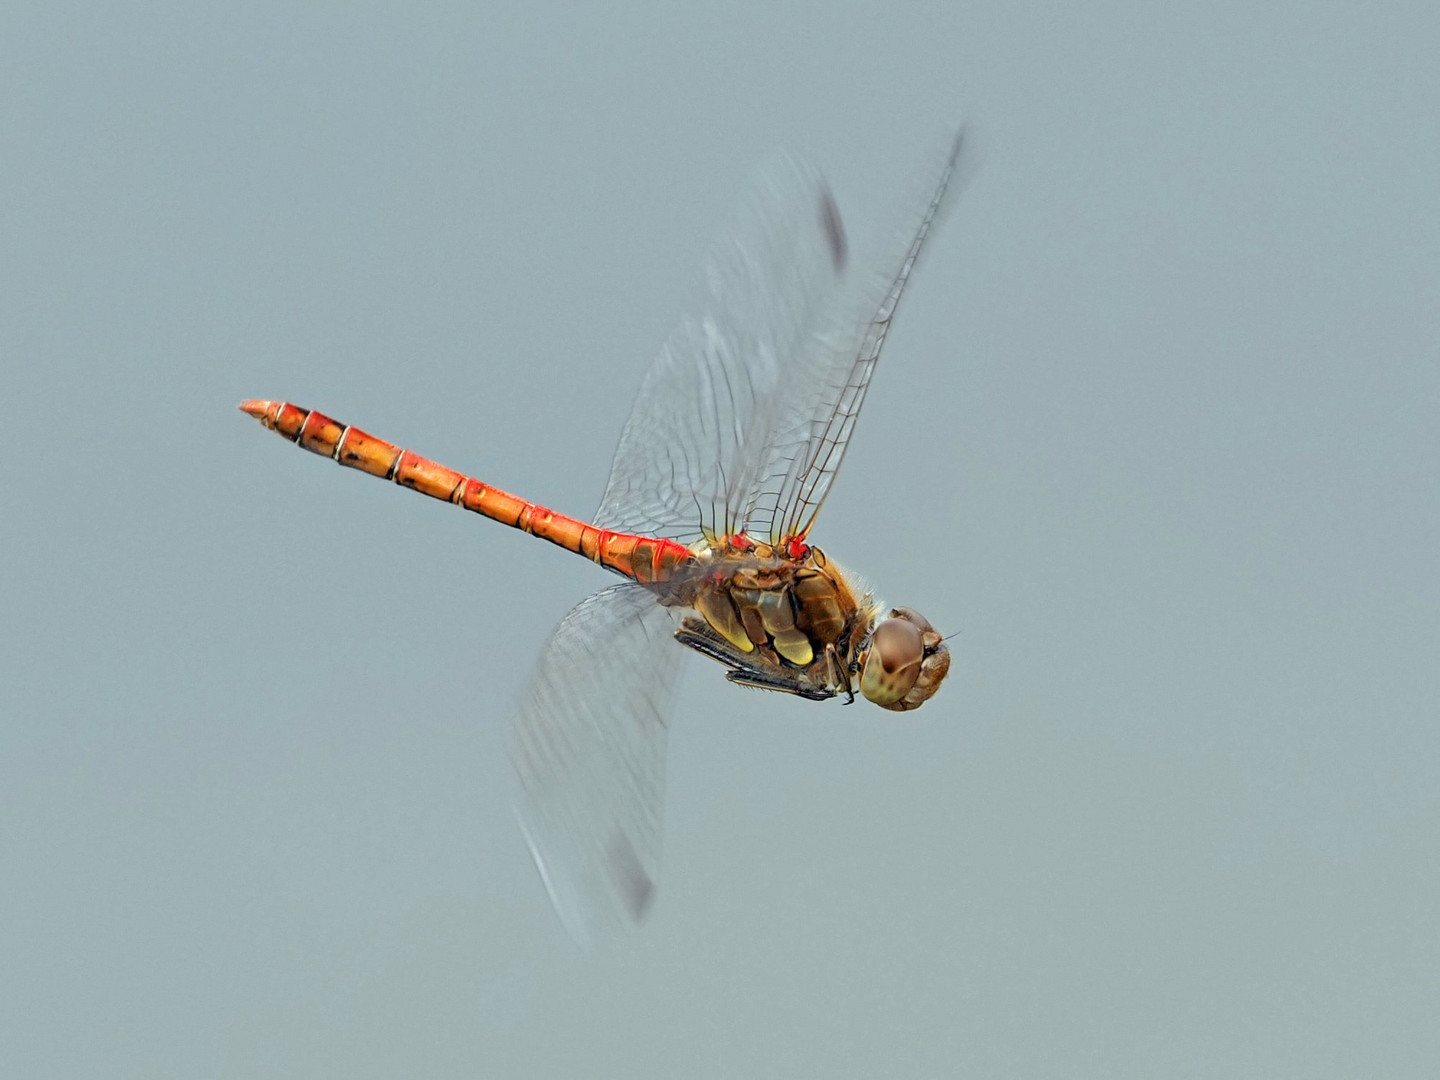 Dragonfly approaching, (maybe Sympetrum striolatum)